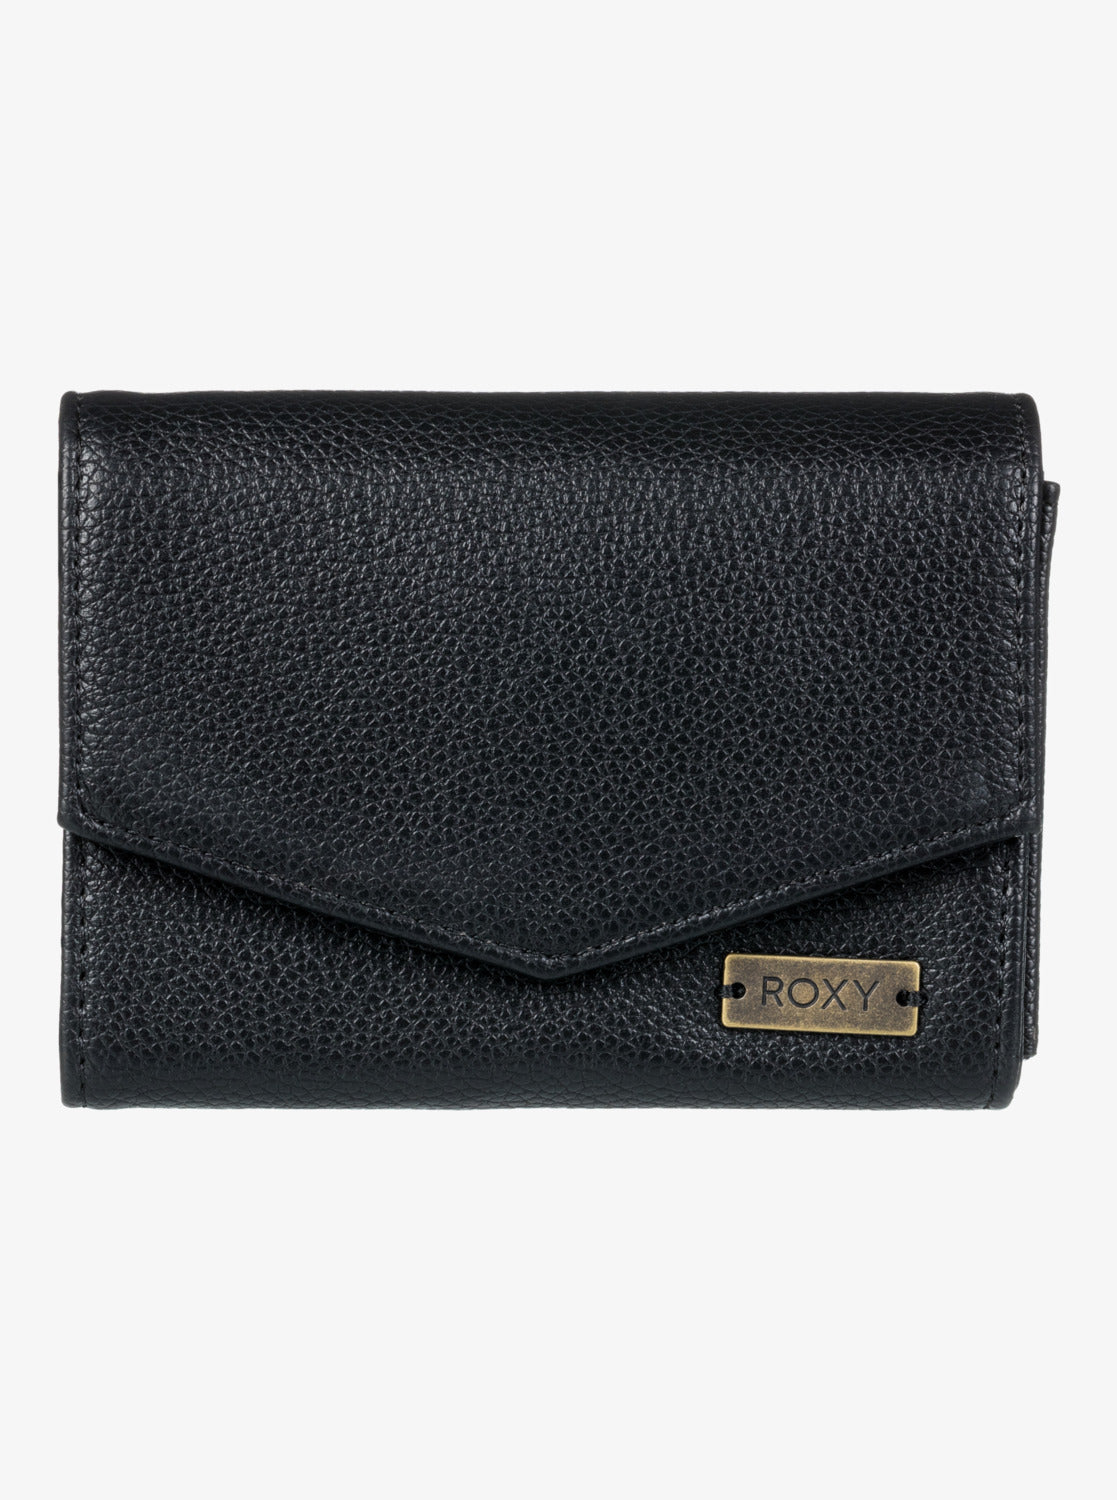 SIDERAL LOVE WALLET